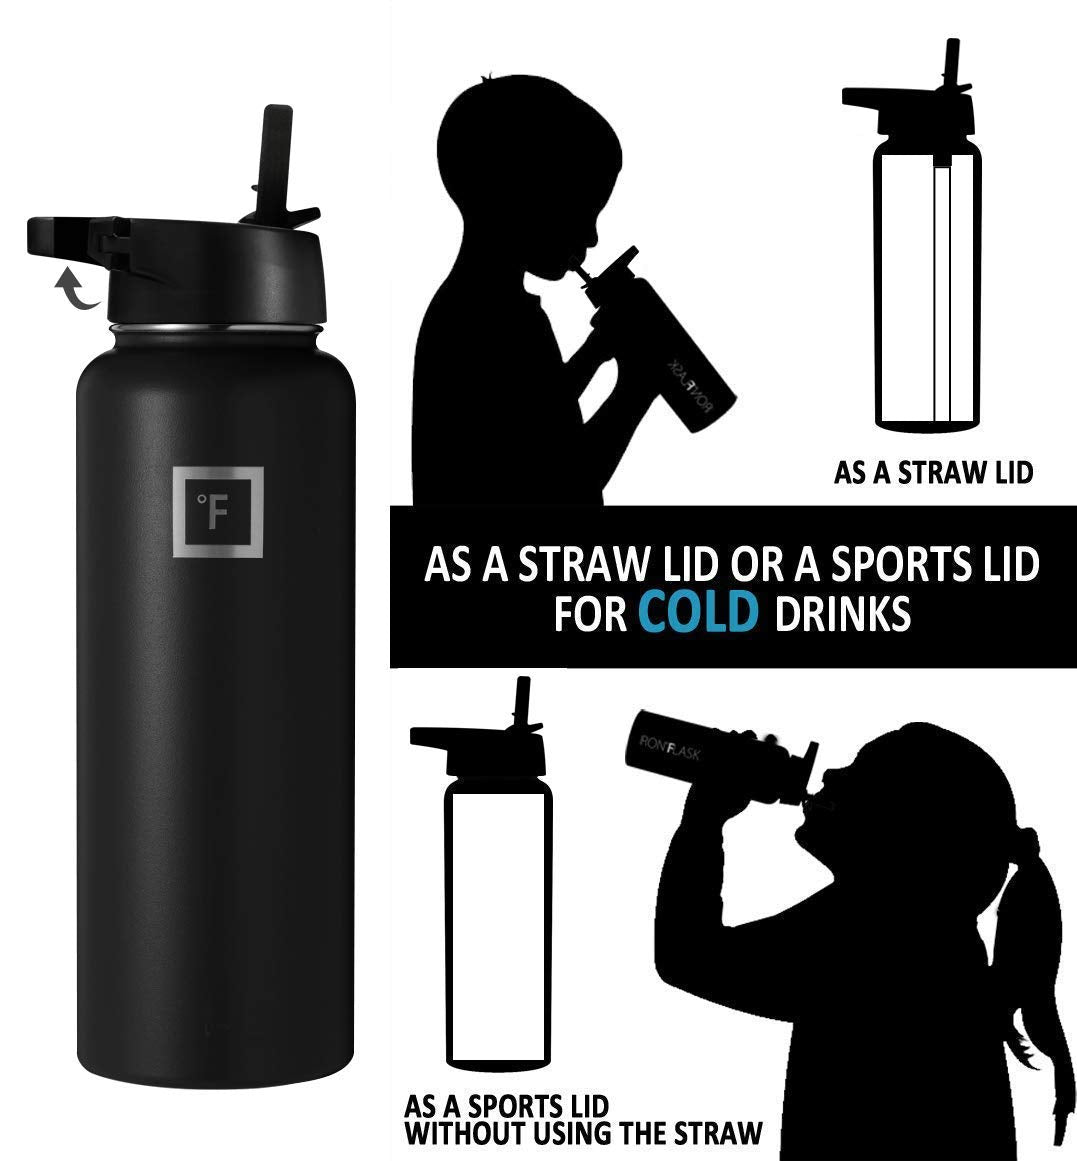 IRON FLASK Sports Water Bottle - 40 Oz, 3 Lids (Spout Lid), Leak Proof,  Vacuum Insulated Stainless Steel, Double Walled, Thermo Mug, Metal Canteen  40 Oz Midnight Black